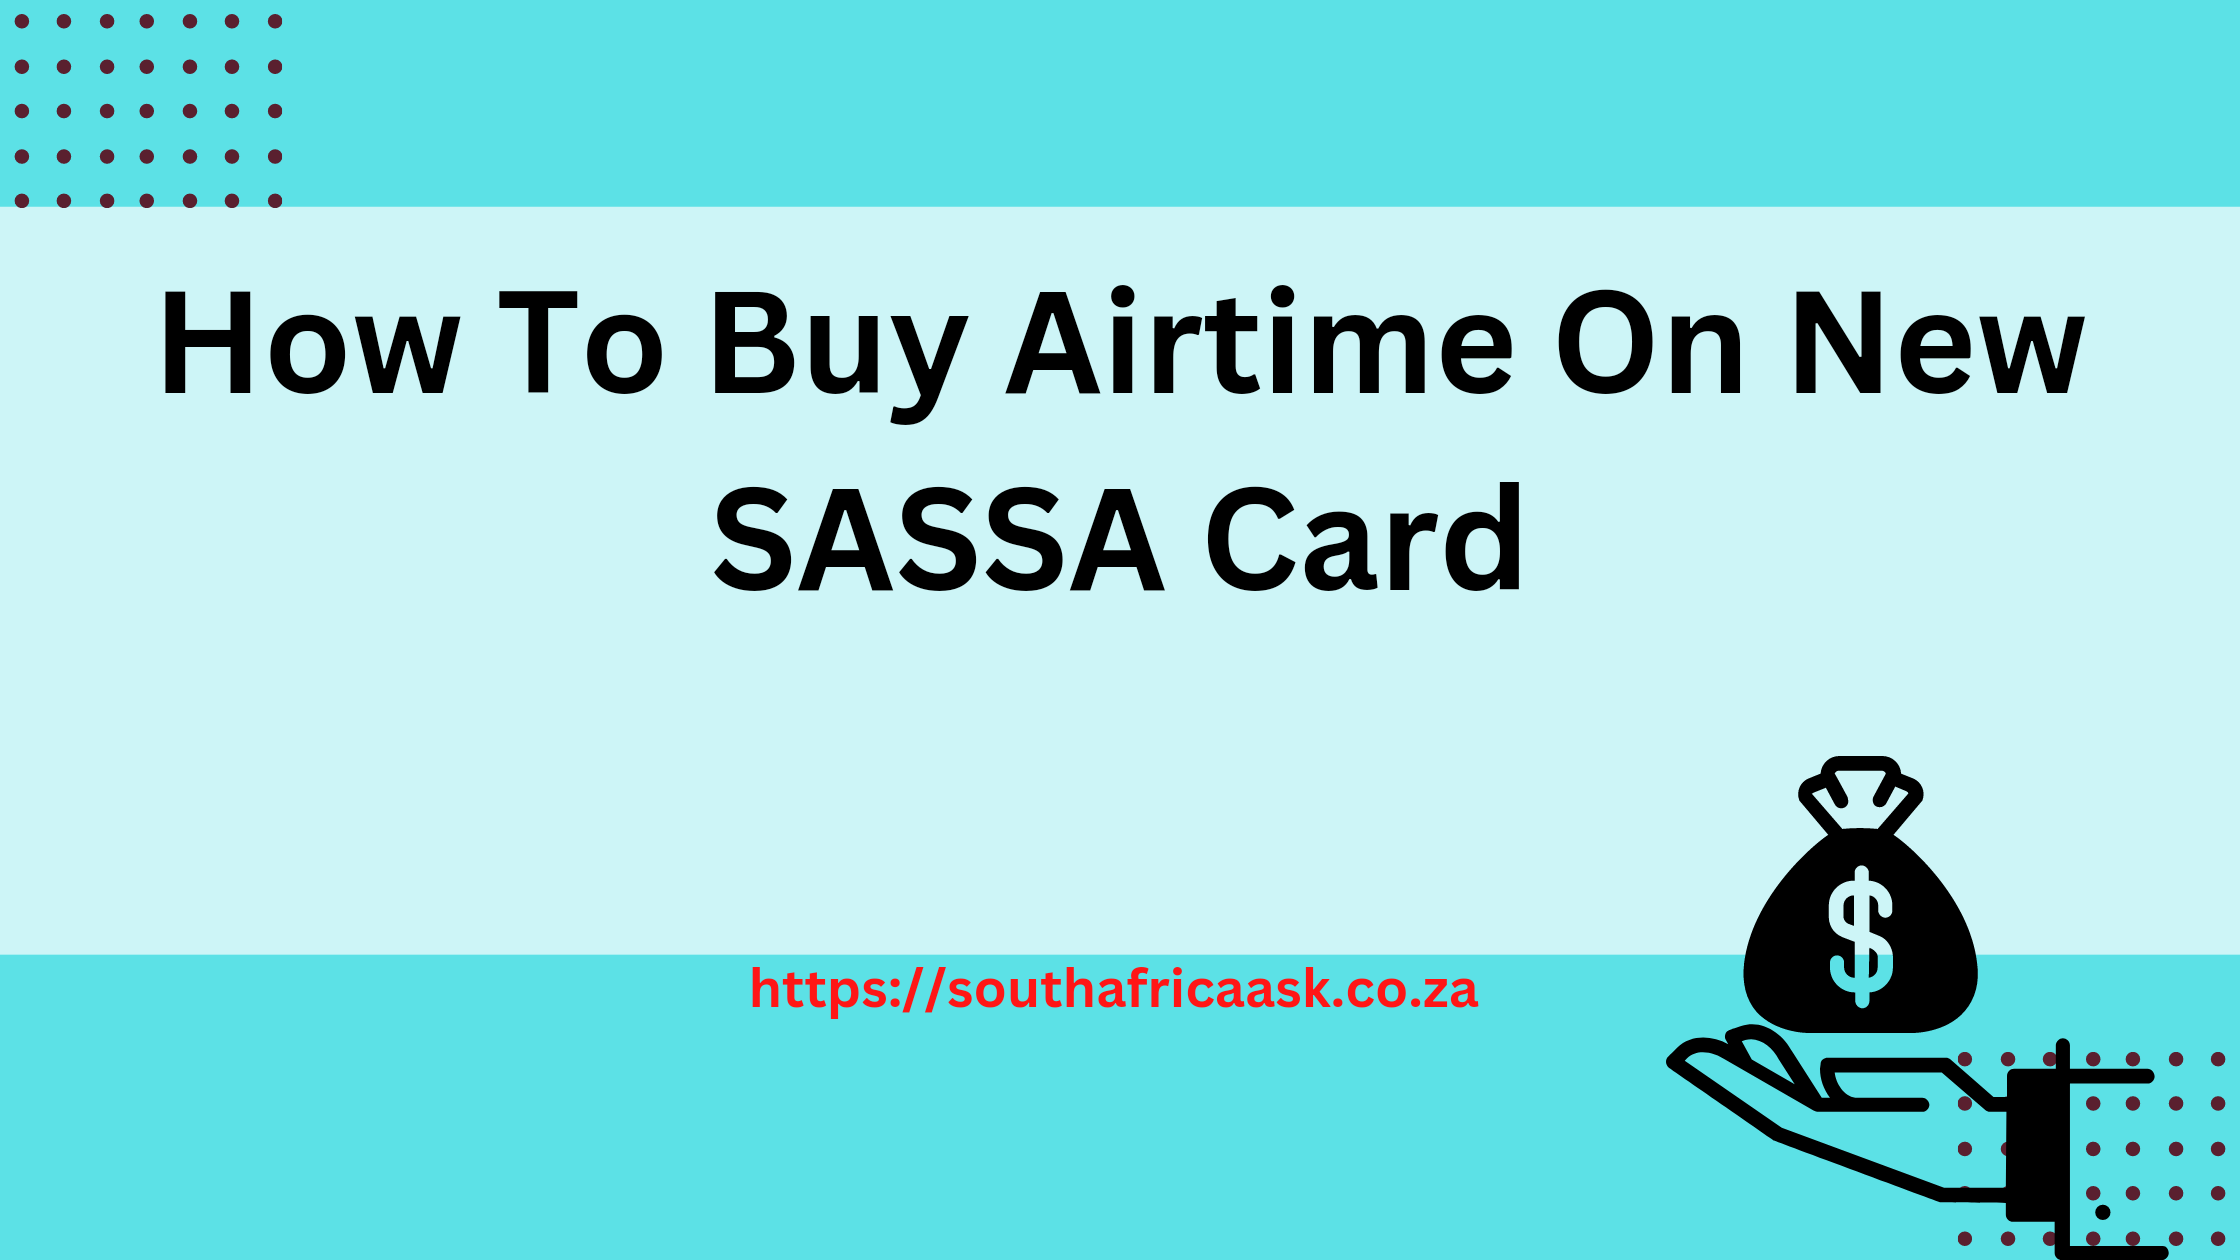 How To Buy Airtime On New SASSA Card